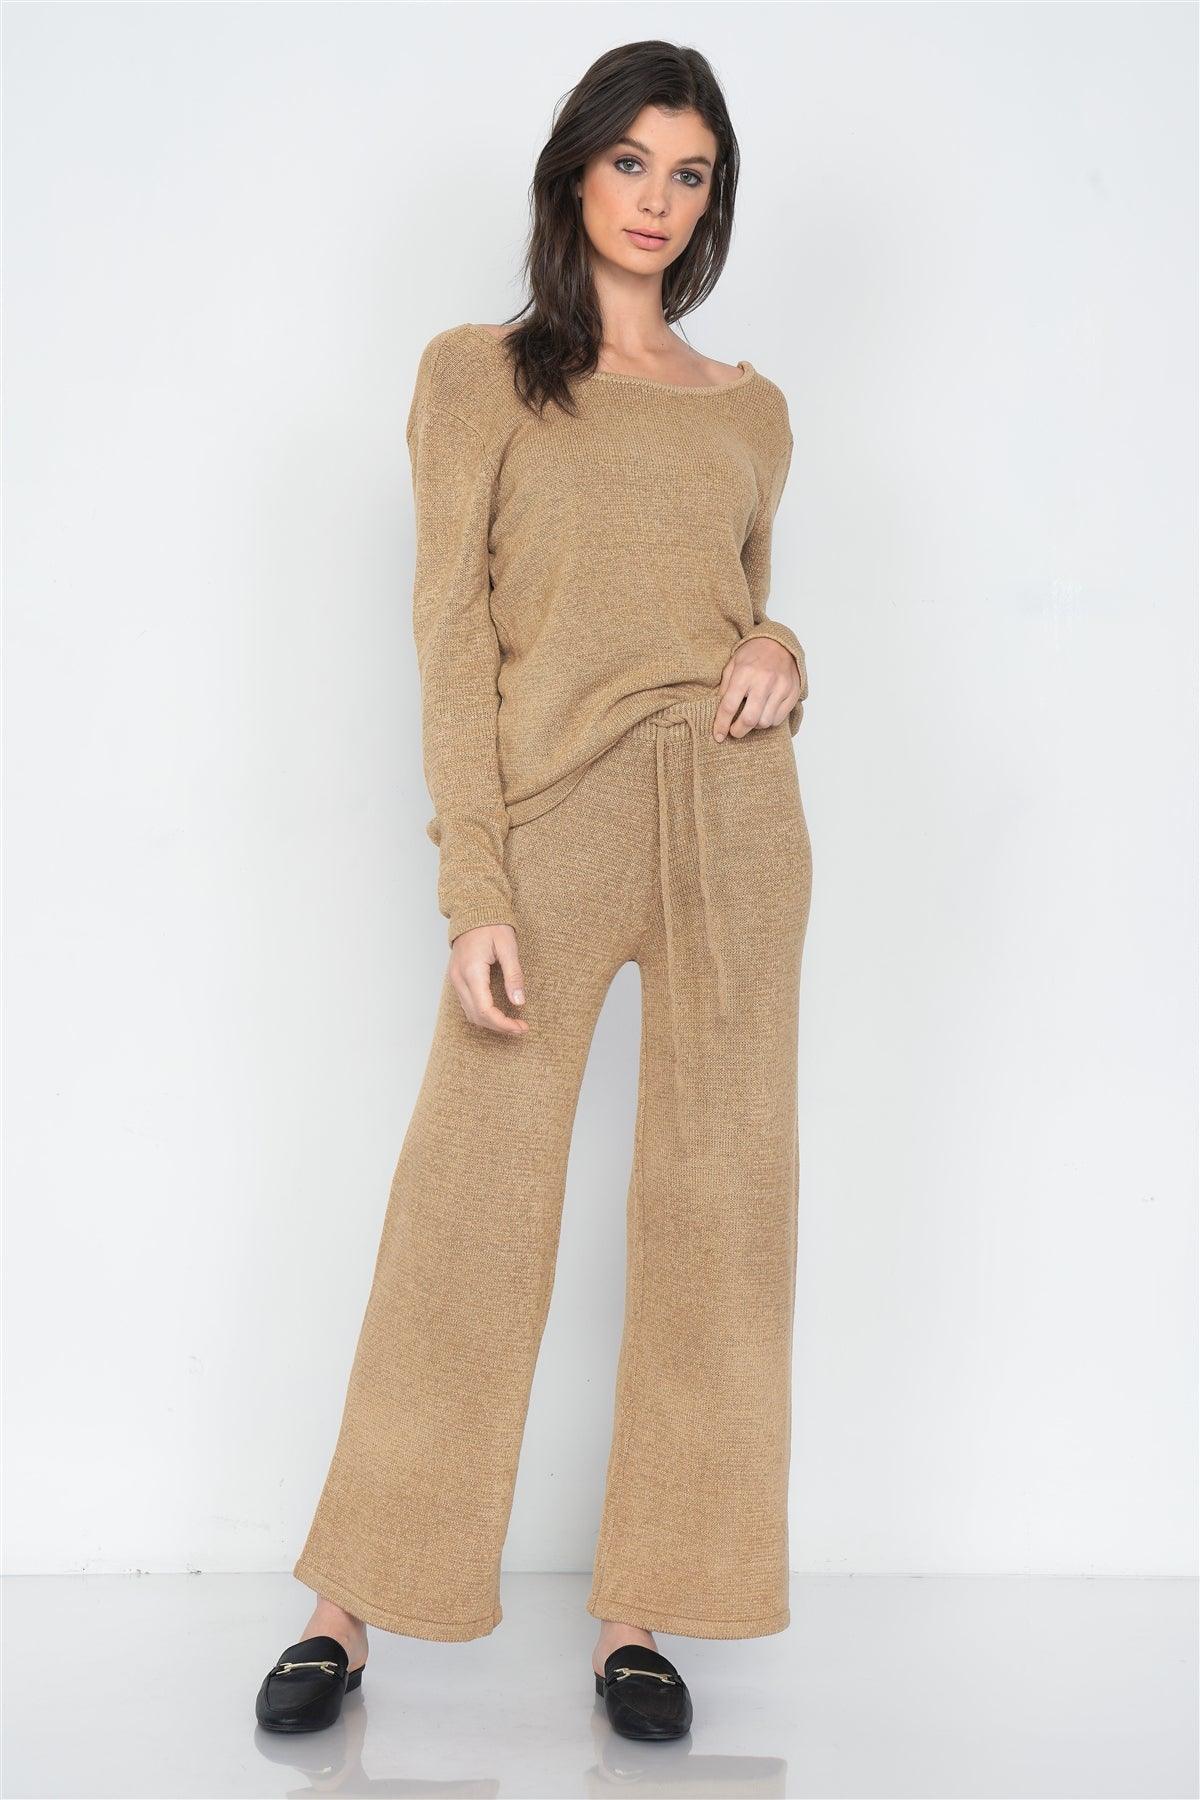 Beige Knit V-Neck Relaxed Fit Sweater & Flare Leg Pant Set   /3-2-1